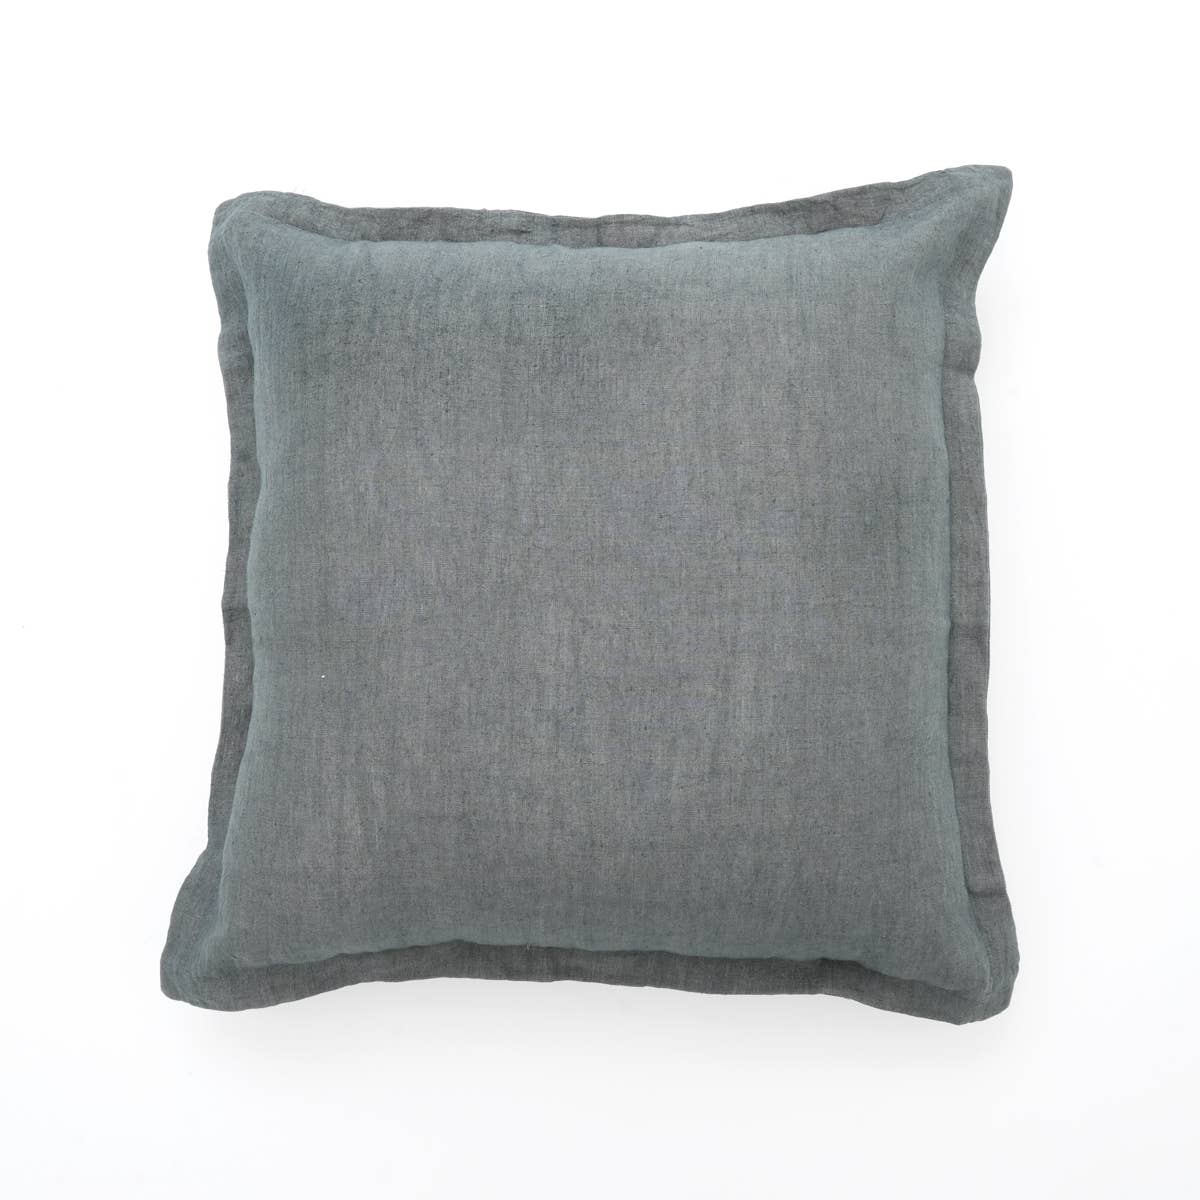 Linen-Solid-Cushion-with-Flanges-Pillows